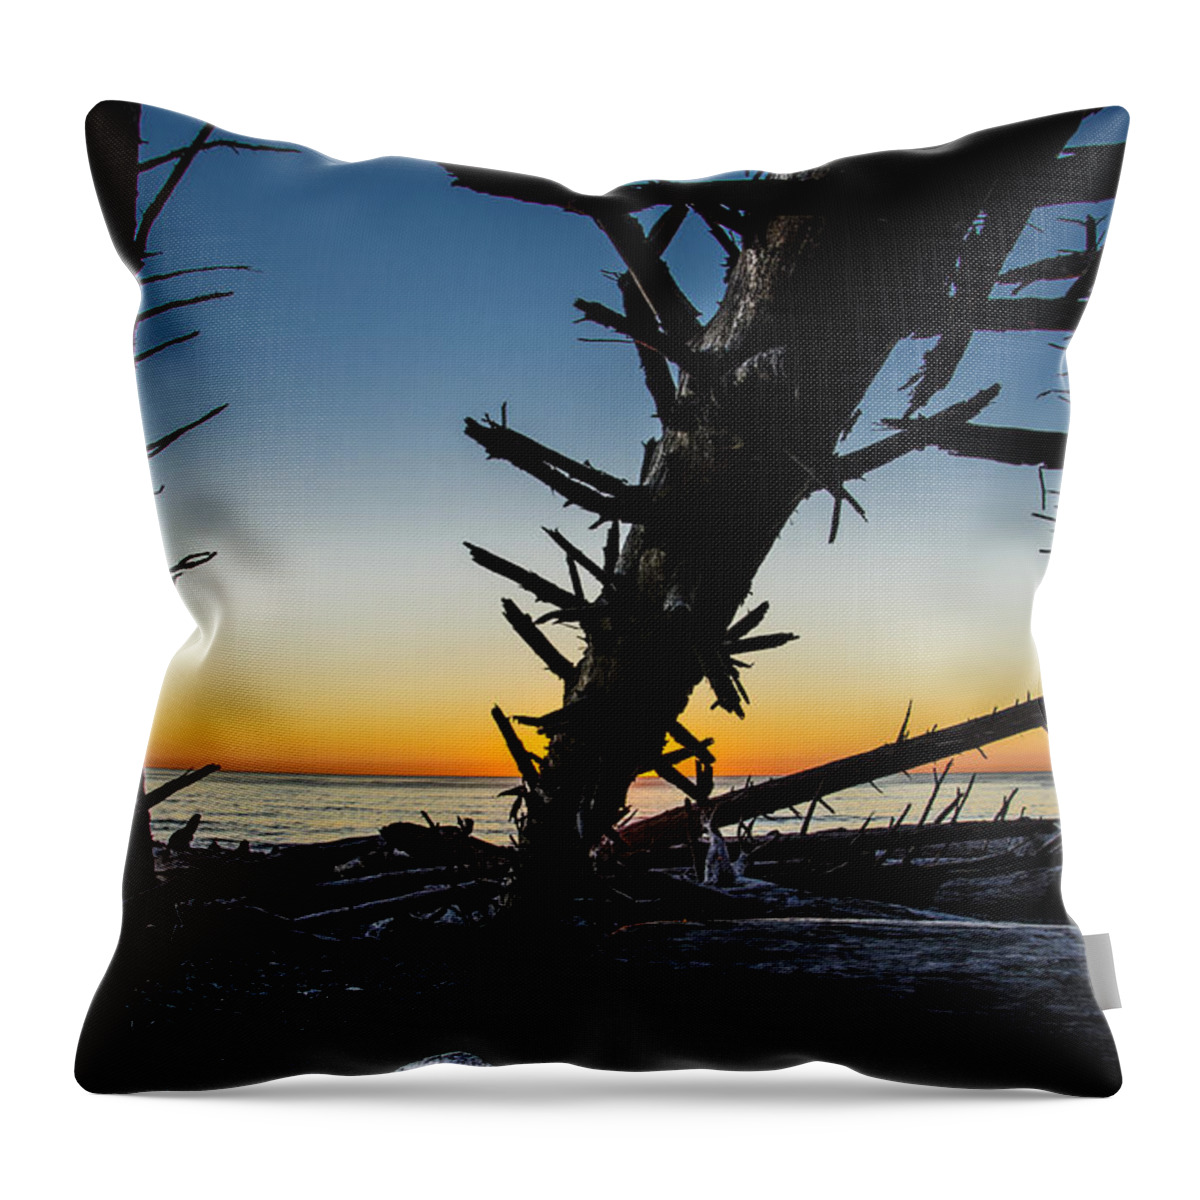 Branch Throw Pillow featuring the photograph Seaside Tree Branch Sunset 3 by Pelo Blanco Photo